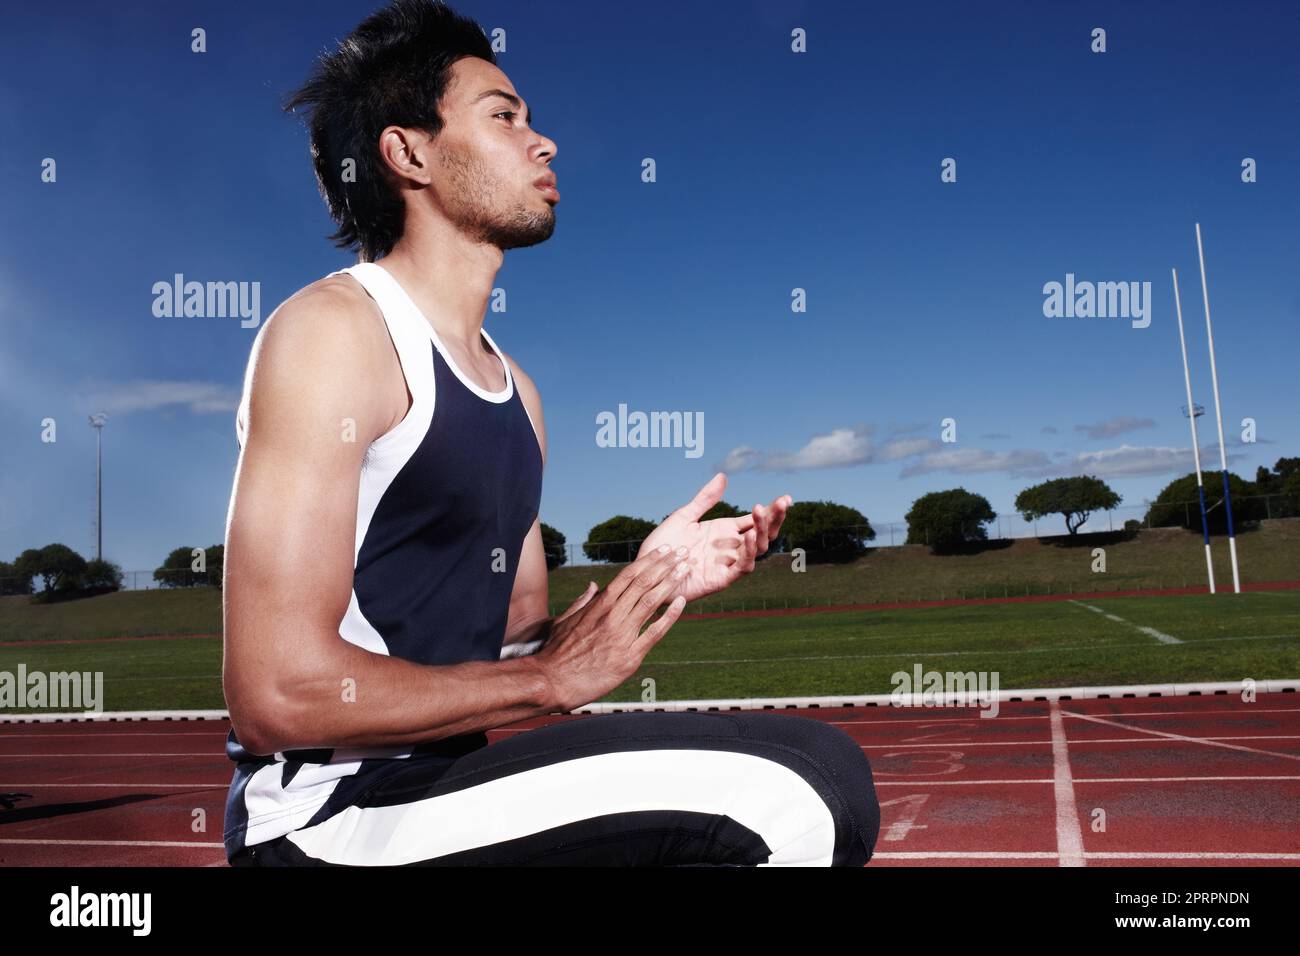 Focussing on my goals. A young athlete introspecting before a race. Stock Photo